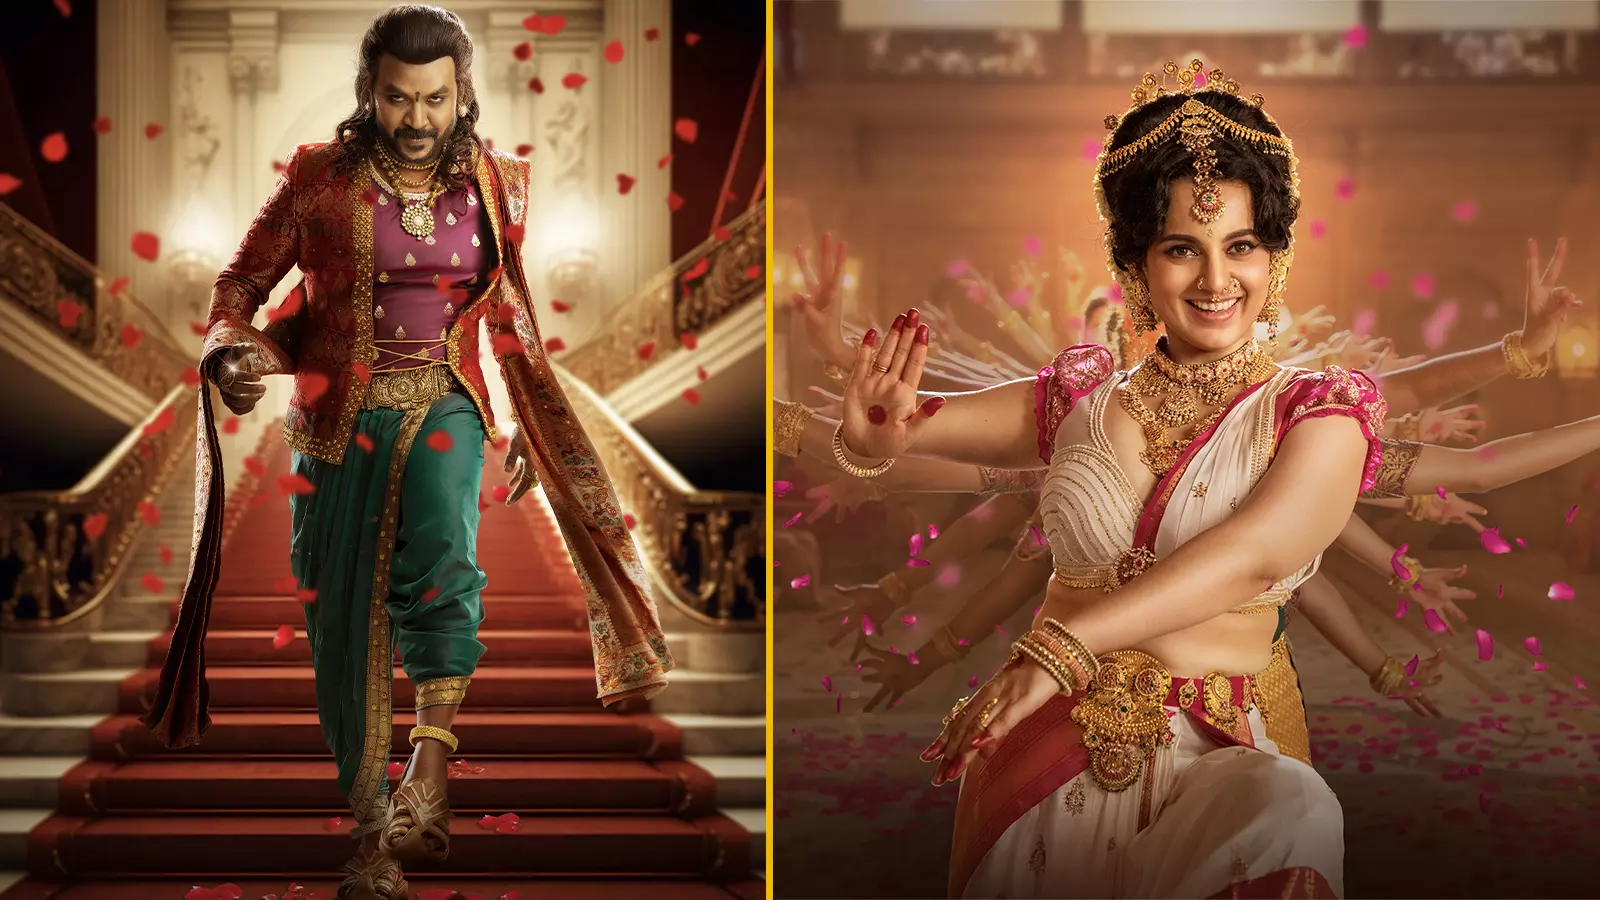 Chandramukhi 2 review: Not a patch on the first part featuring Rajini-Jyothika